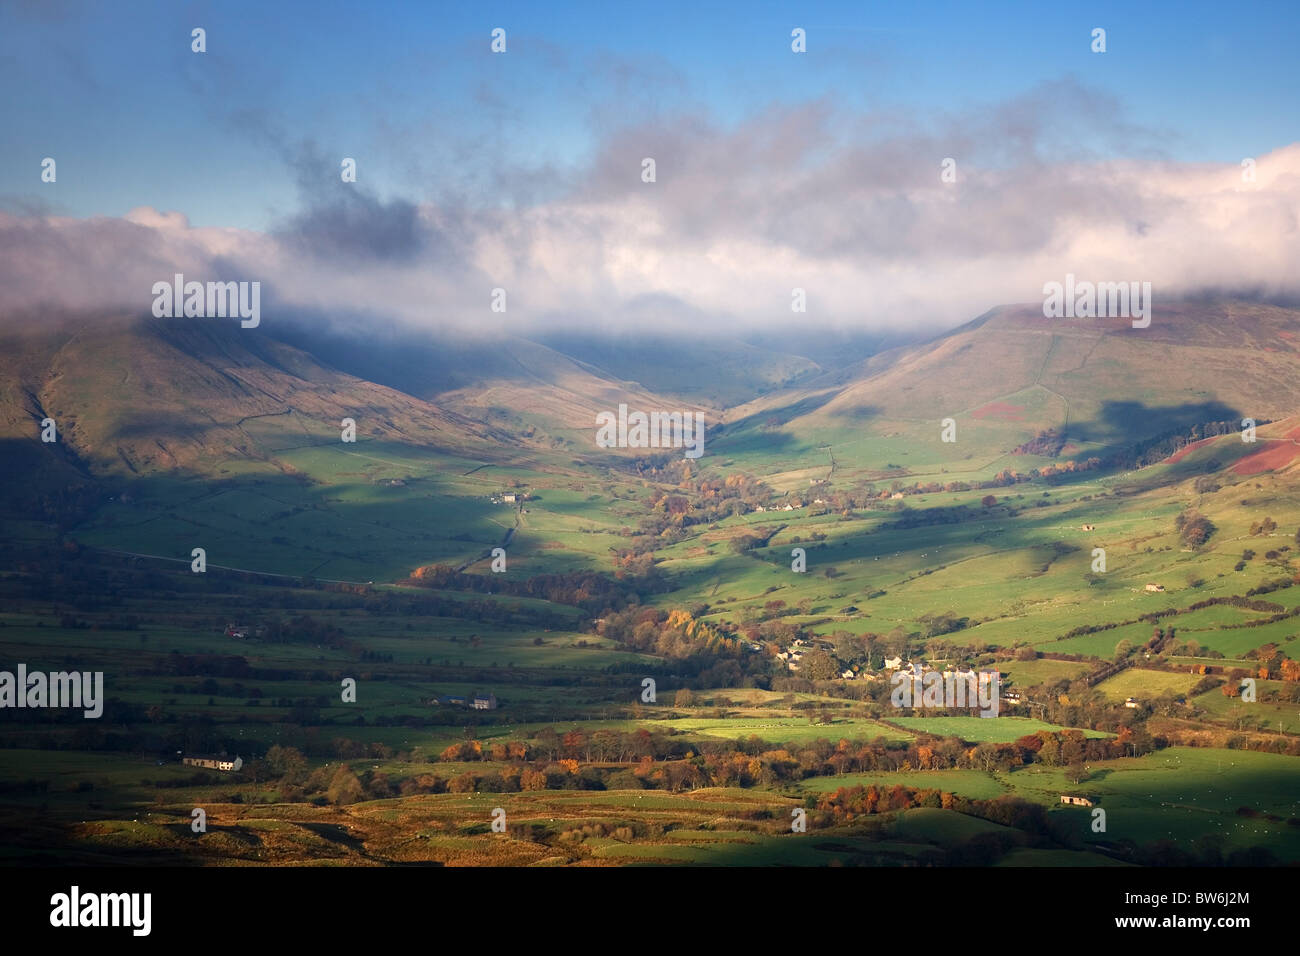 Low cloud hangs over The hilltops of The Vale Of Edale near Castleton Derbyshire Peak District UK Stock Photo